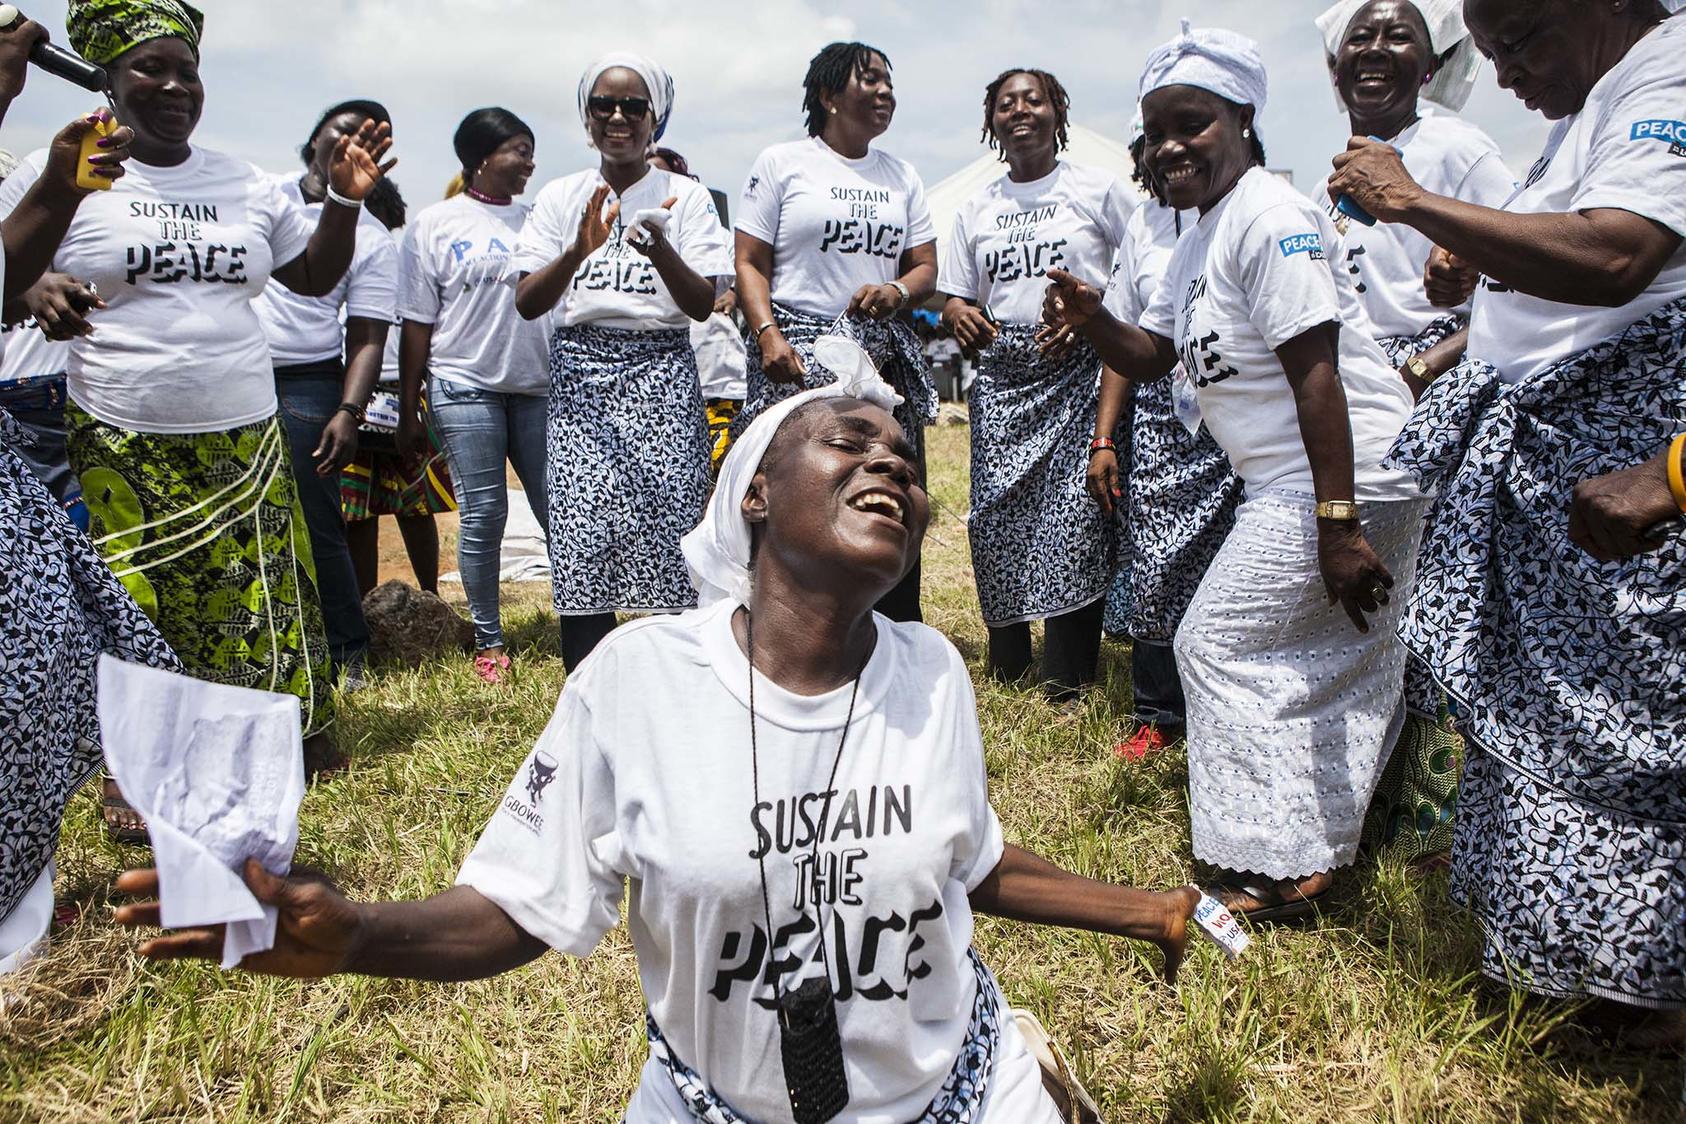 The Women in Peacebuilding Network calls for a peaceful election, in Monrovia, Liberia, Oct. 9, 2017. In 2003, women similarly clad in white organized widescale demonstrations pushing for an end to a 14-year civil war. (Jane Hahn/The New York Times)